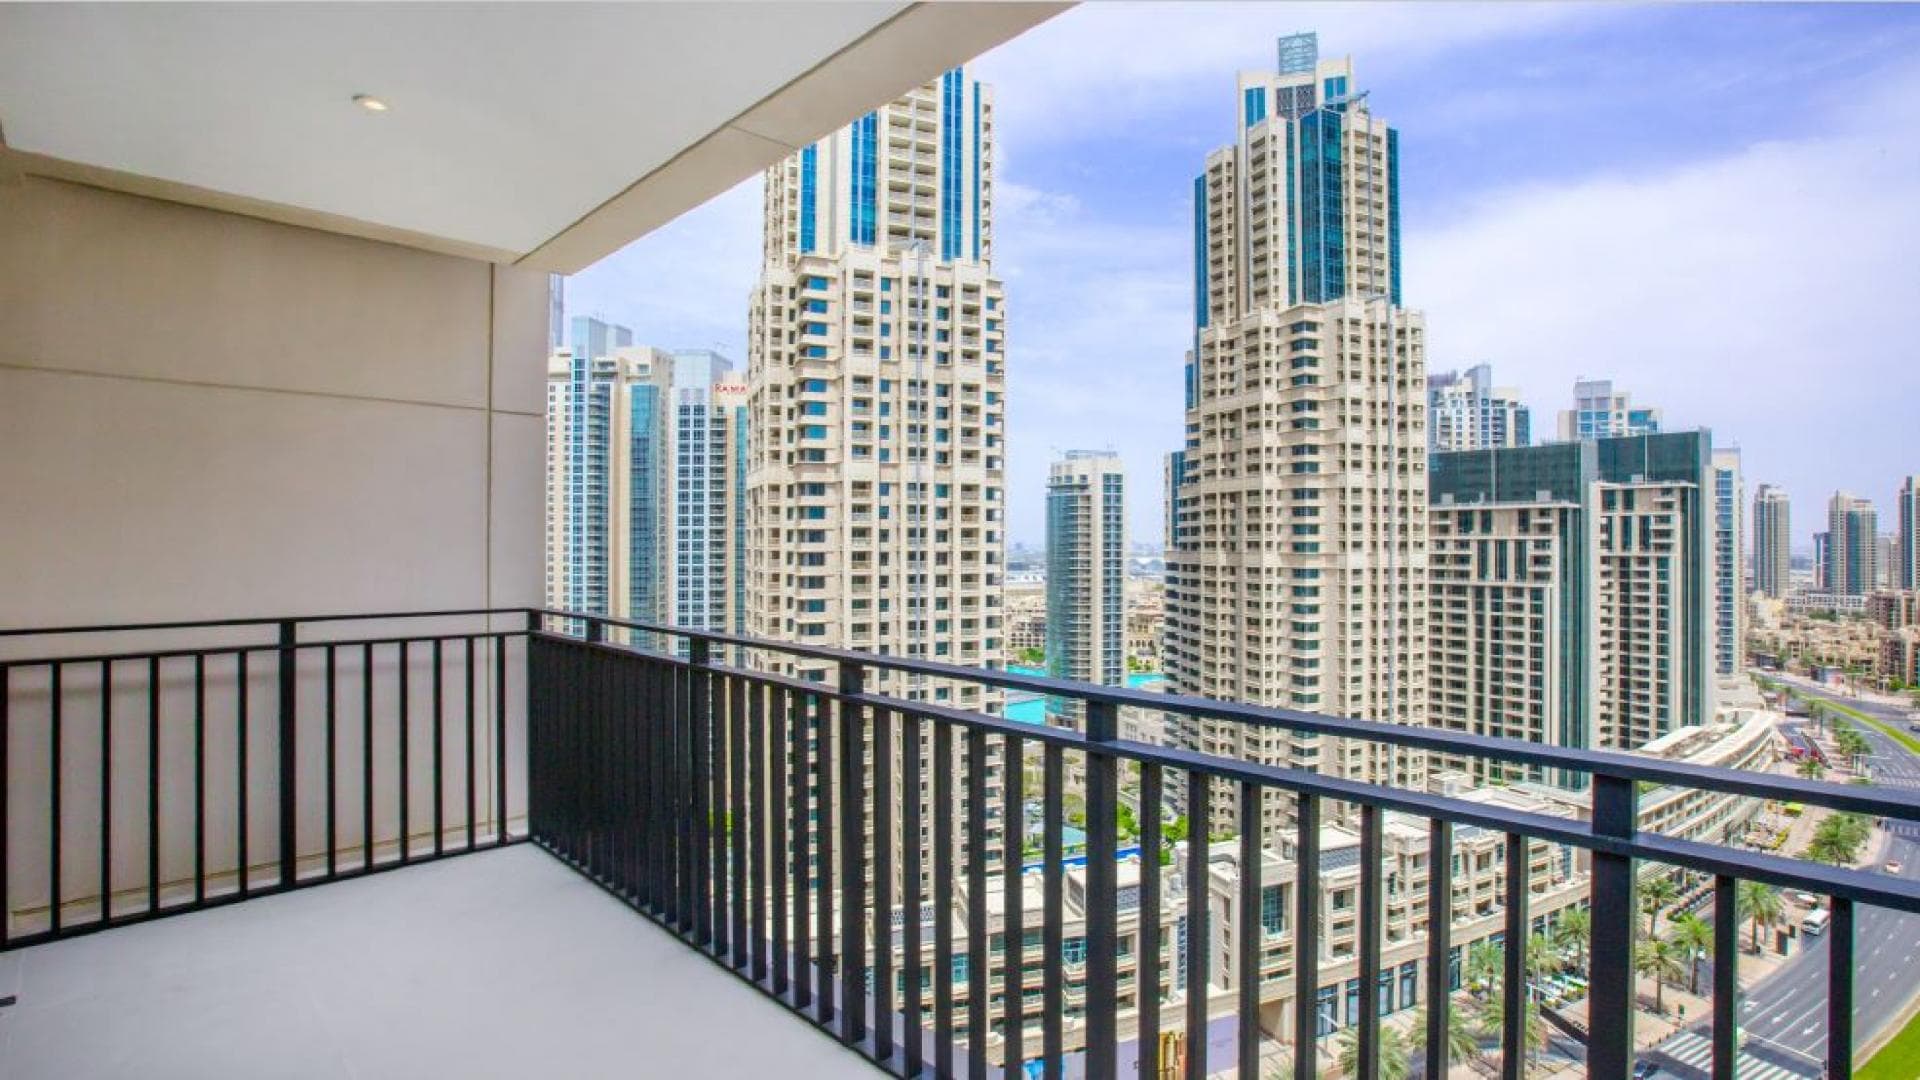 2 Bedroom Apartment For Rent  Lp36054 1ef01a15a2aee900.jpeg